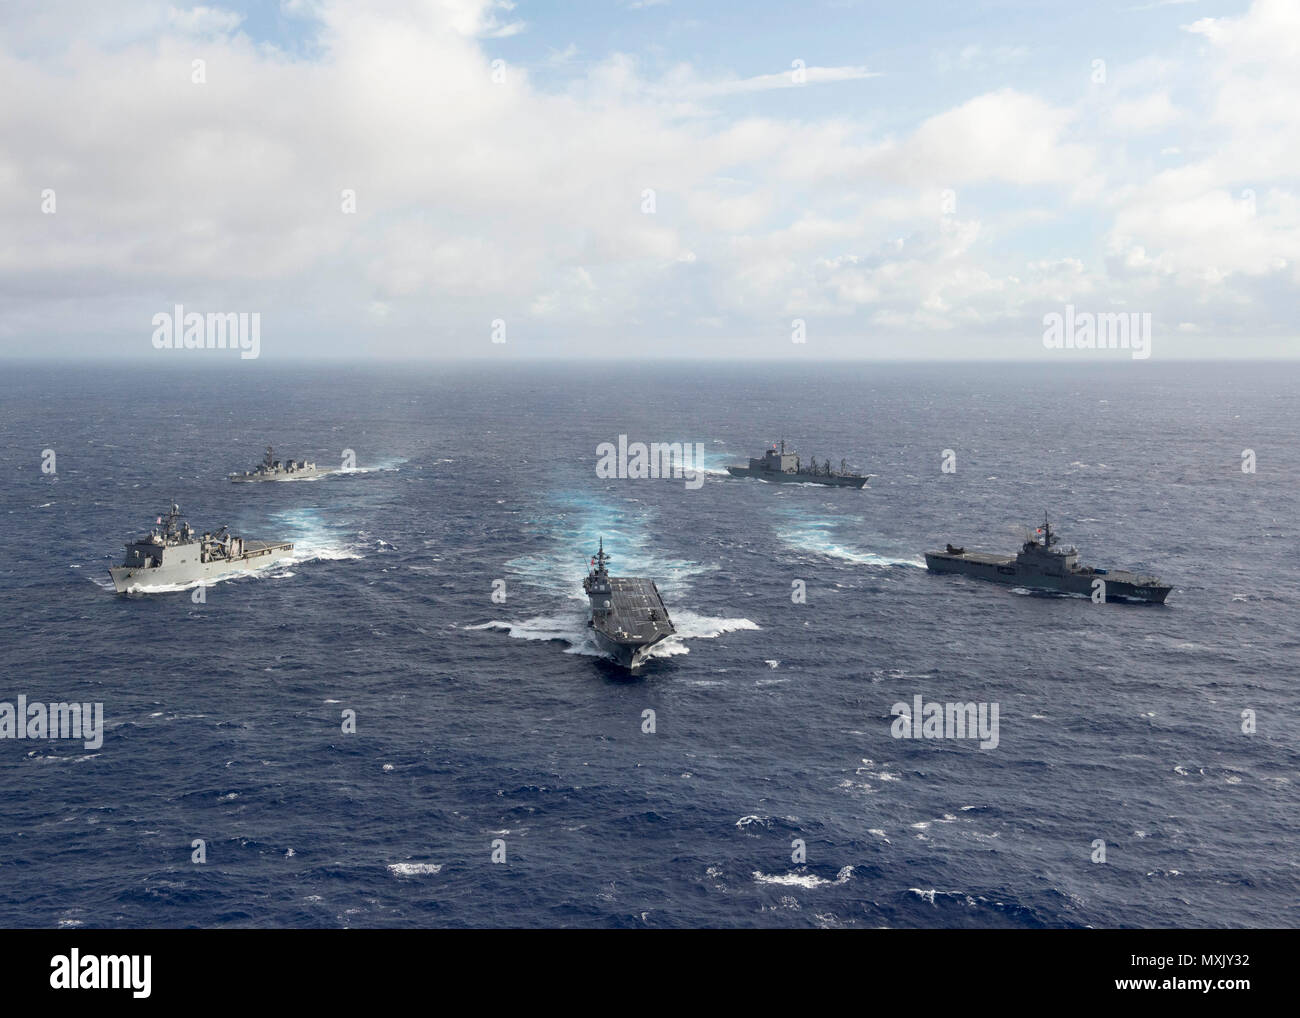 161106-N-ZK021-239 PACIFIC OCEAN (Nov. 6, 2016) - Ships participating in Keen Sword 2017 steam in formation during a photo exercise. Keen Sword 17 is a joint and bilateral field training exercise (FTX) between U.S. and Japanese forces meant to increase readiness and interoperability within the framework of the U.S. – Japan alliance. (U.S. Navy photo by Petty Officer First Class Nardel Gervacio/Released) Stock Photo